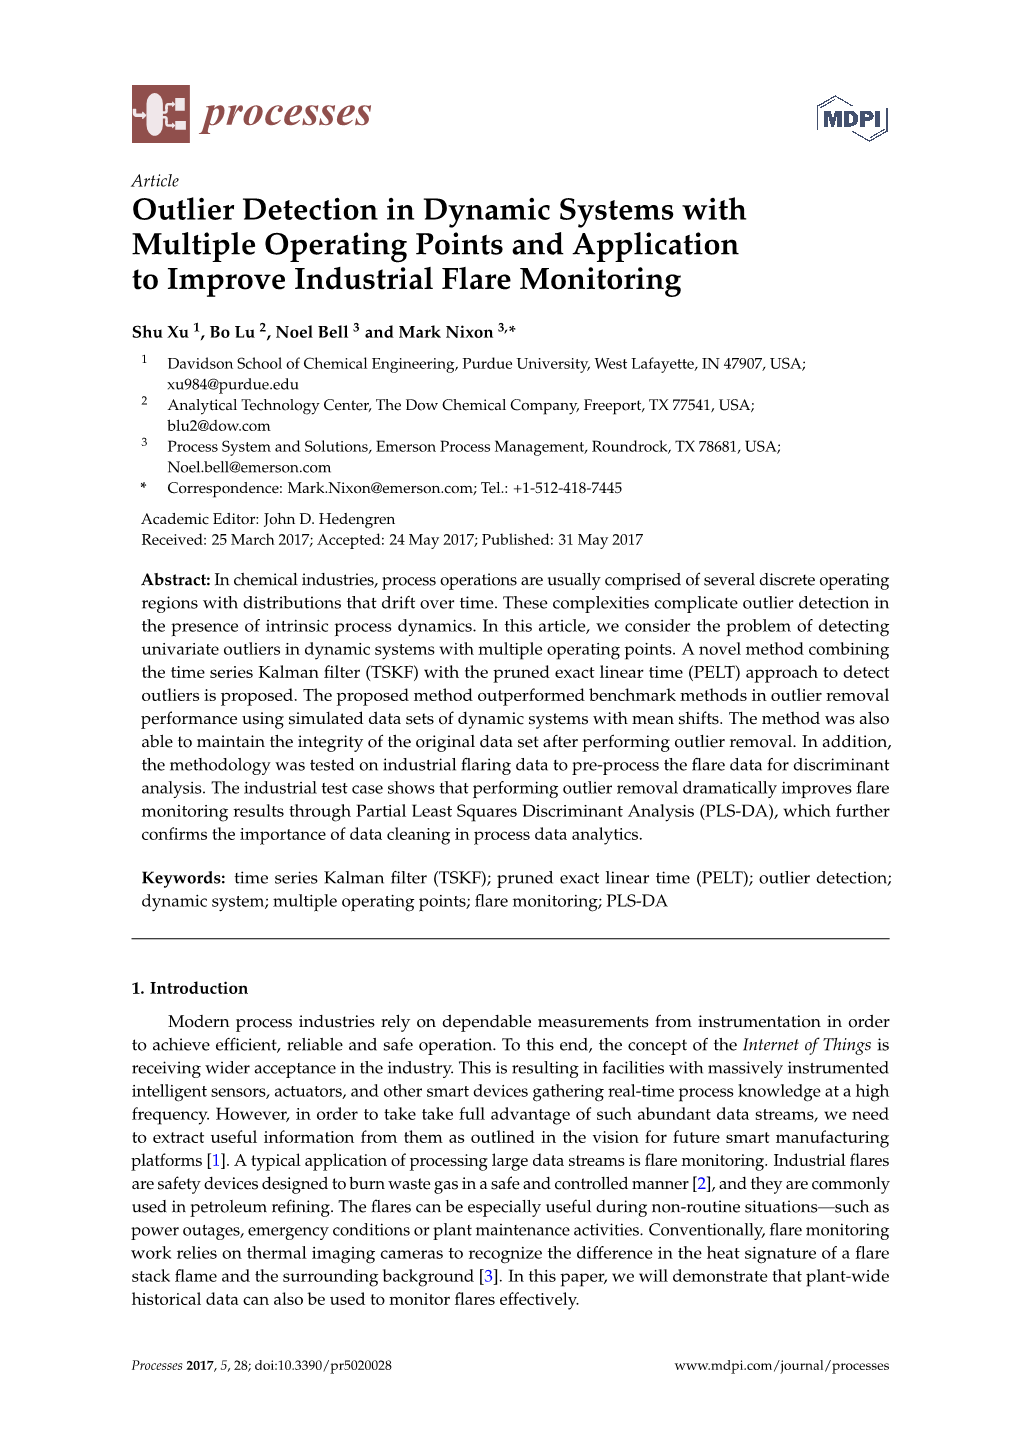 Outlier Detection in Dynamic Systems with Multiple Operating Points and Application to Improve Industrial Flare Monitoring